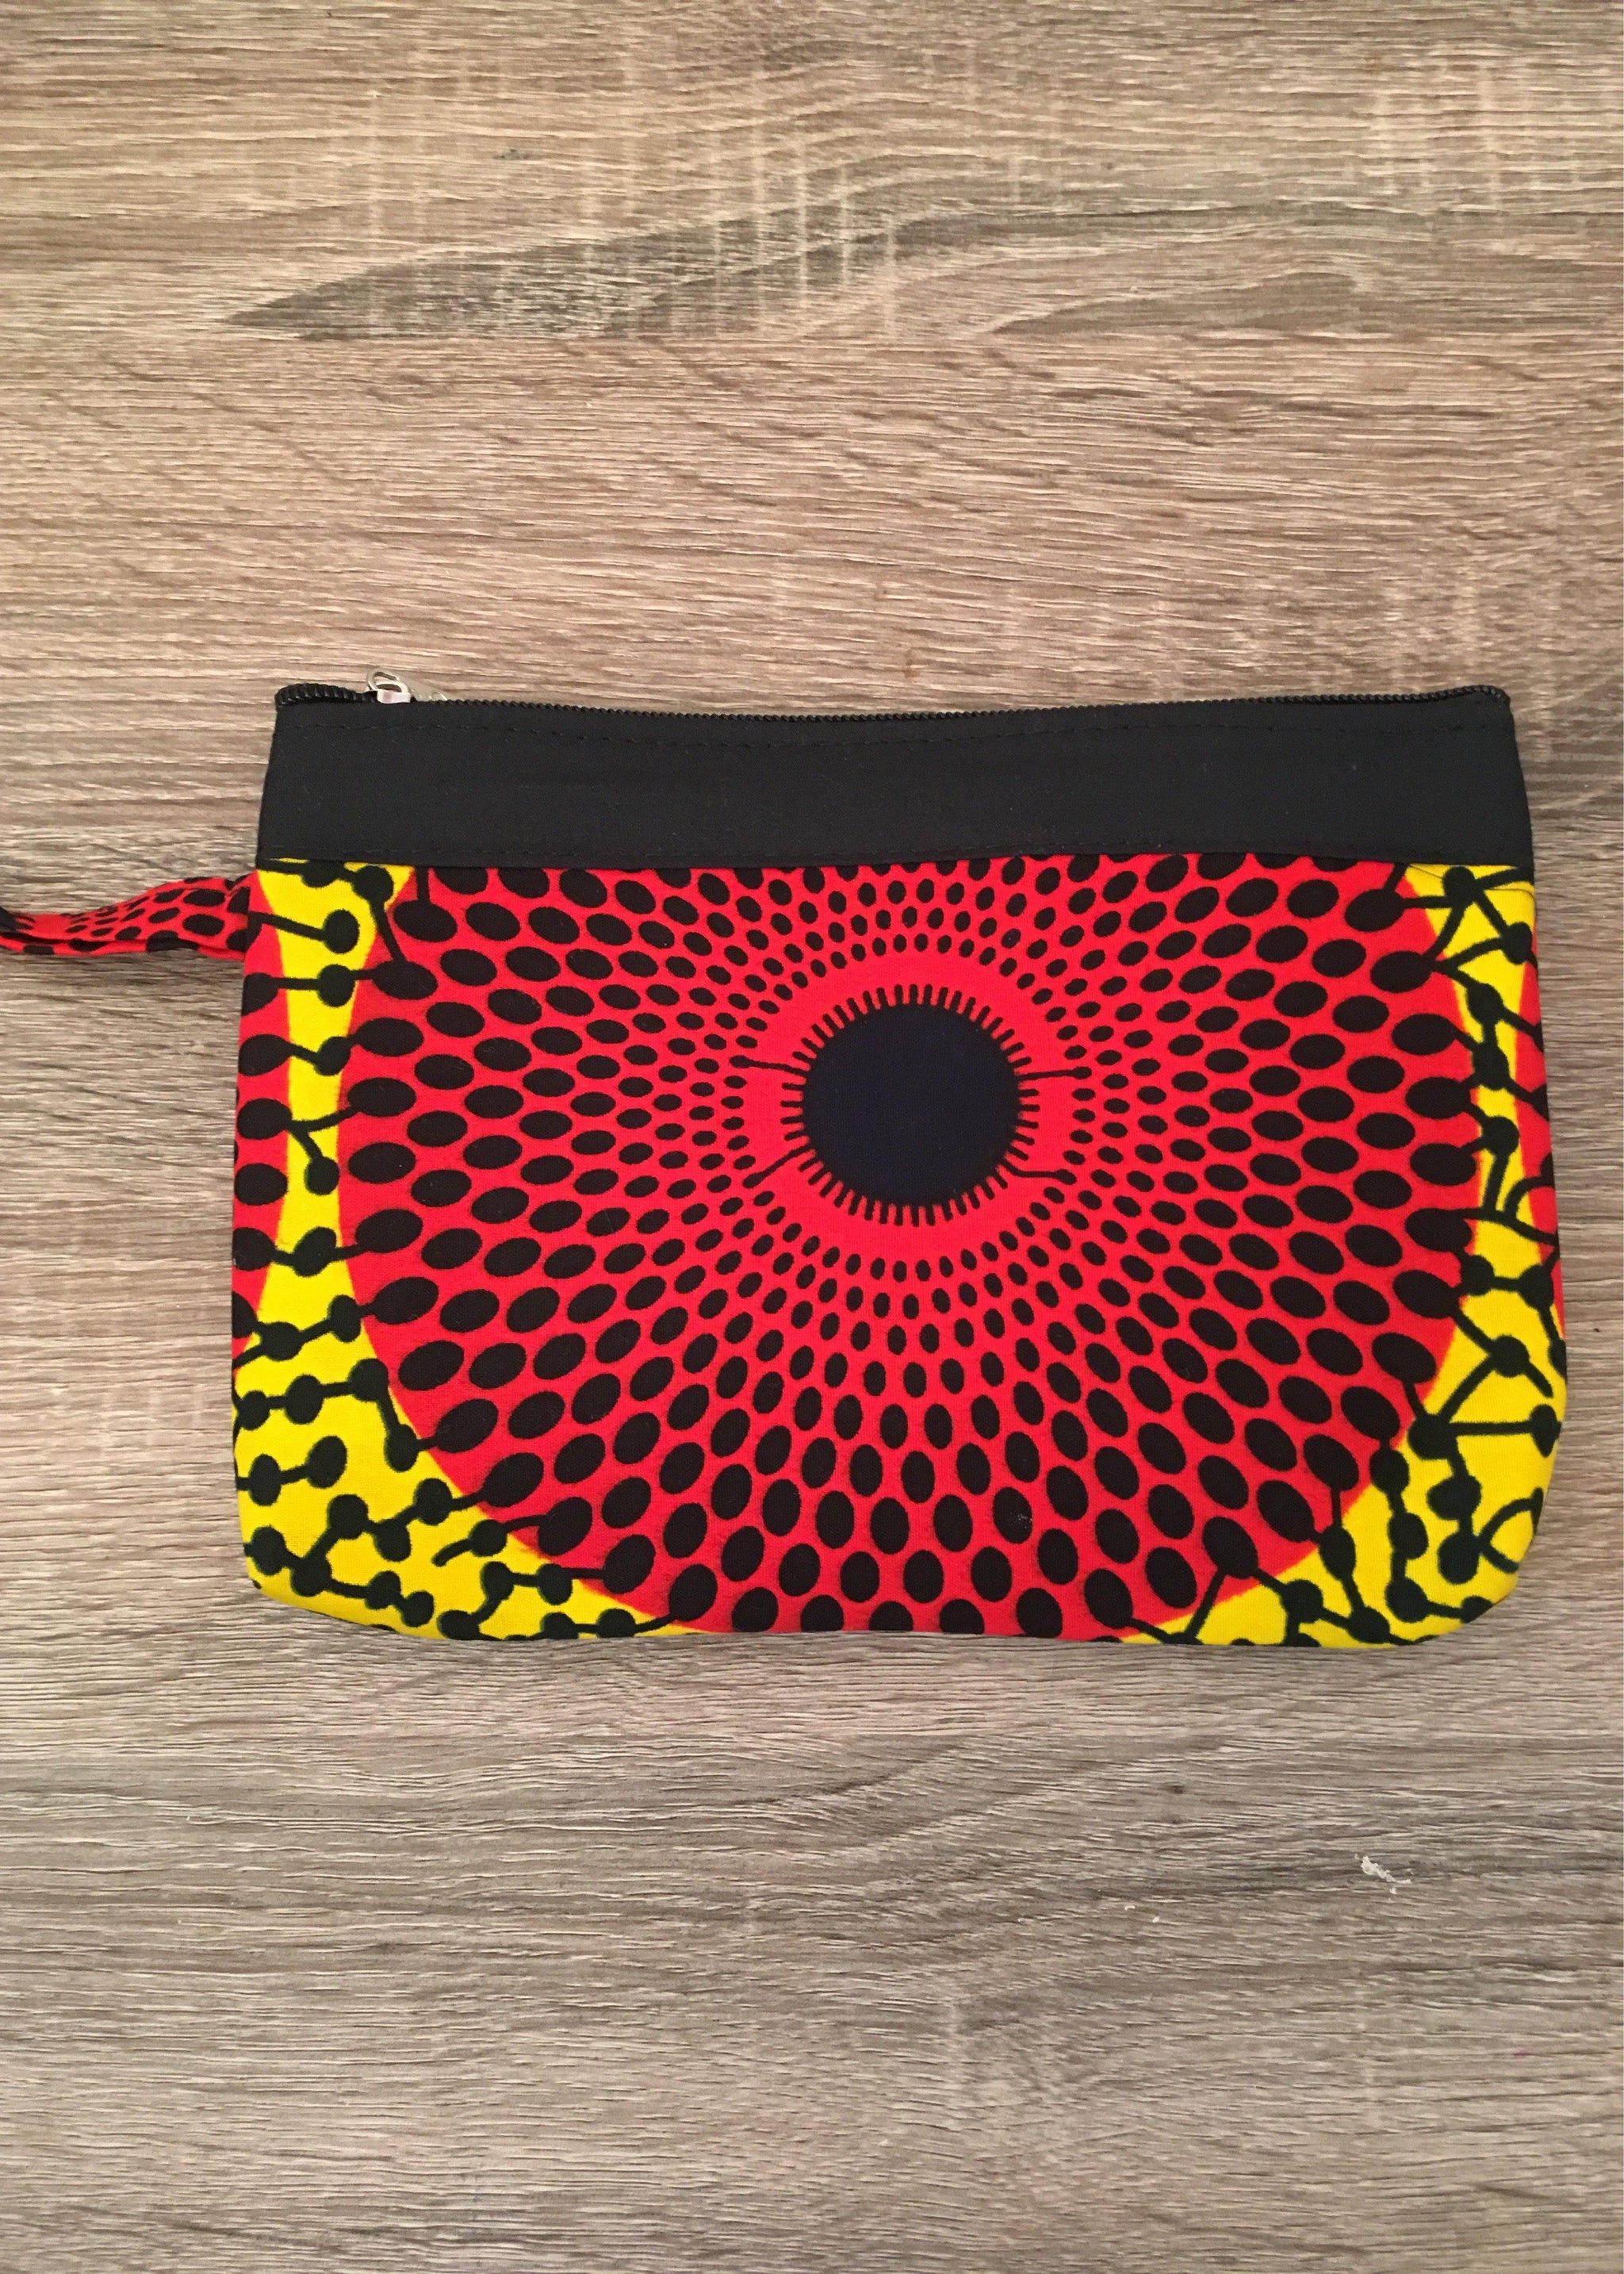 Clutch bag African Print-Contemporary and Colorful Ensemble-African apparel and accessories